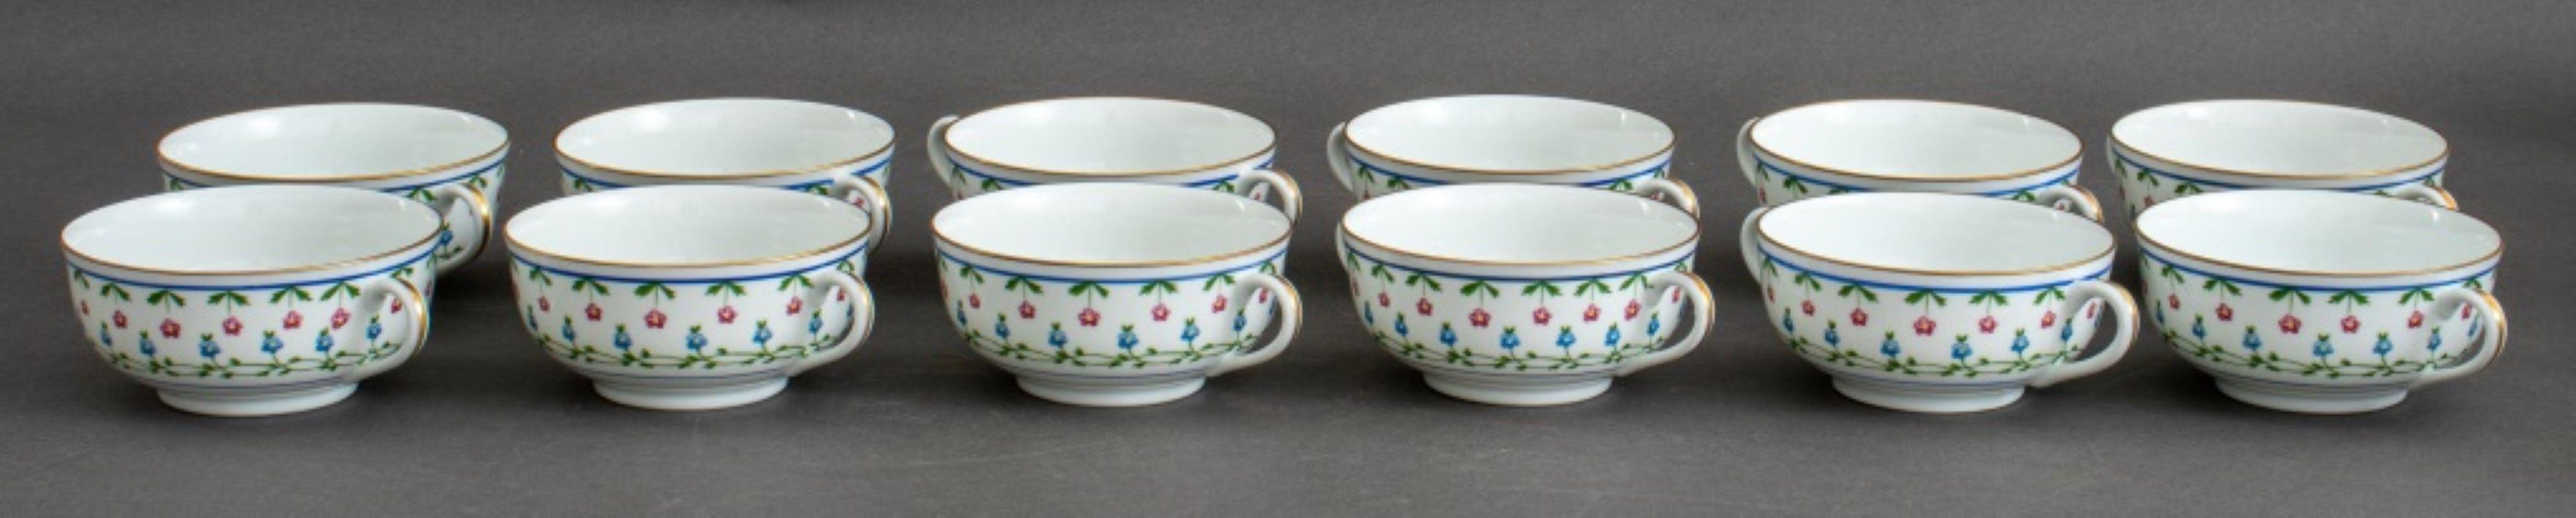 Raynaud Porcelain Lafayette Dinner Service for 12 3